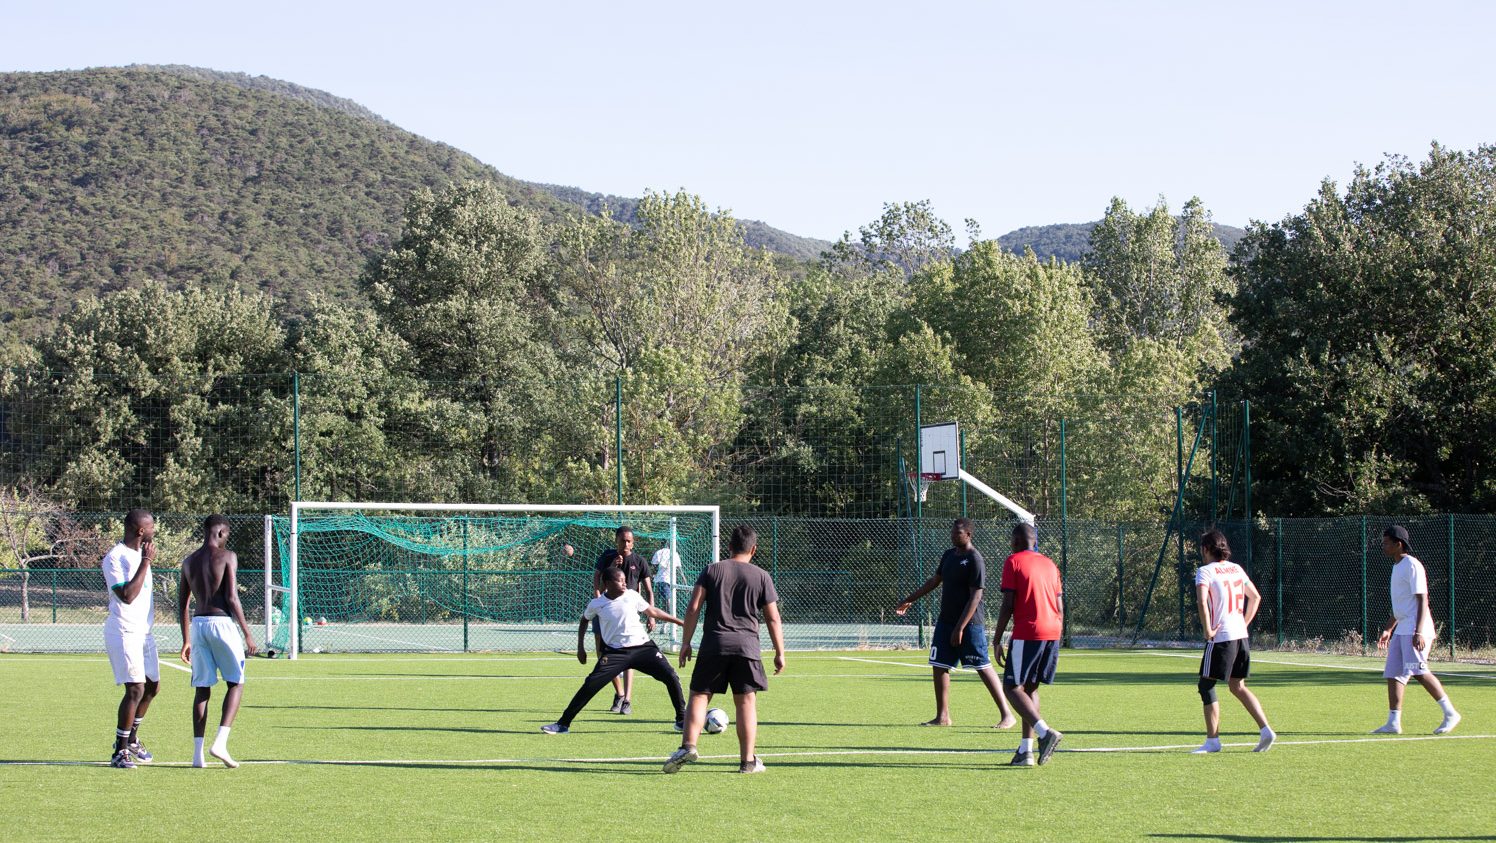 La Chabotte campers playing soccer, France